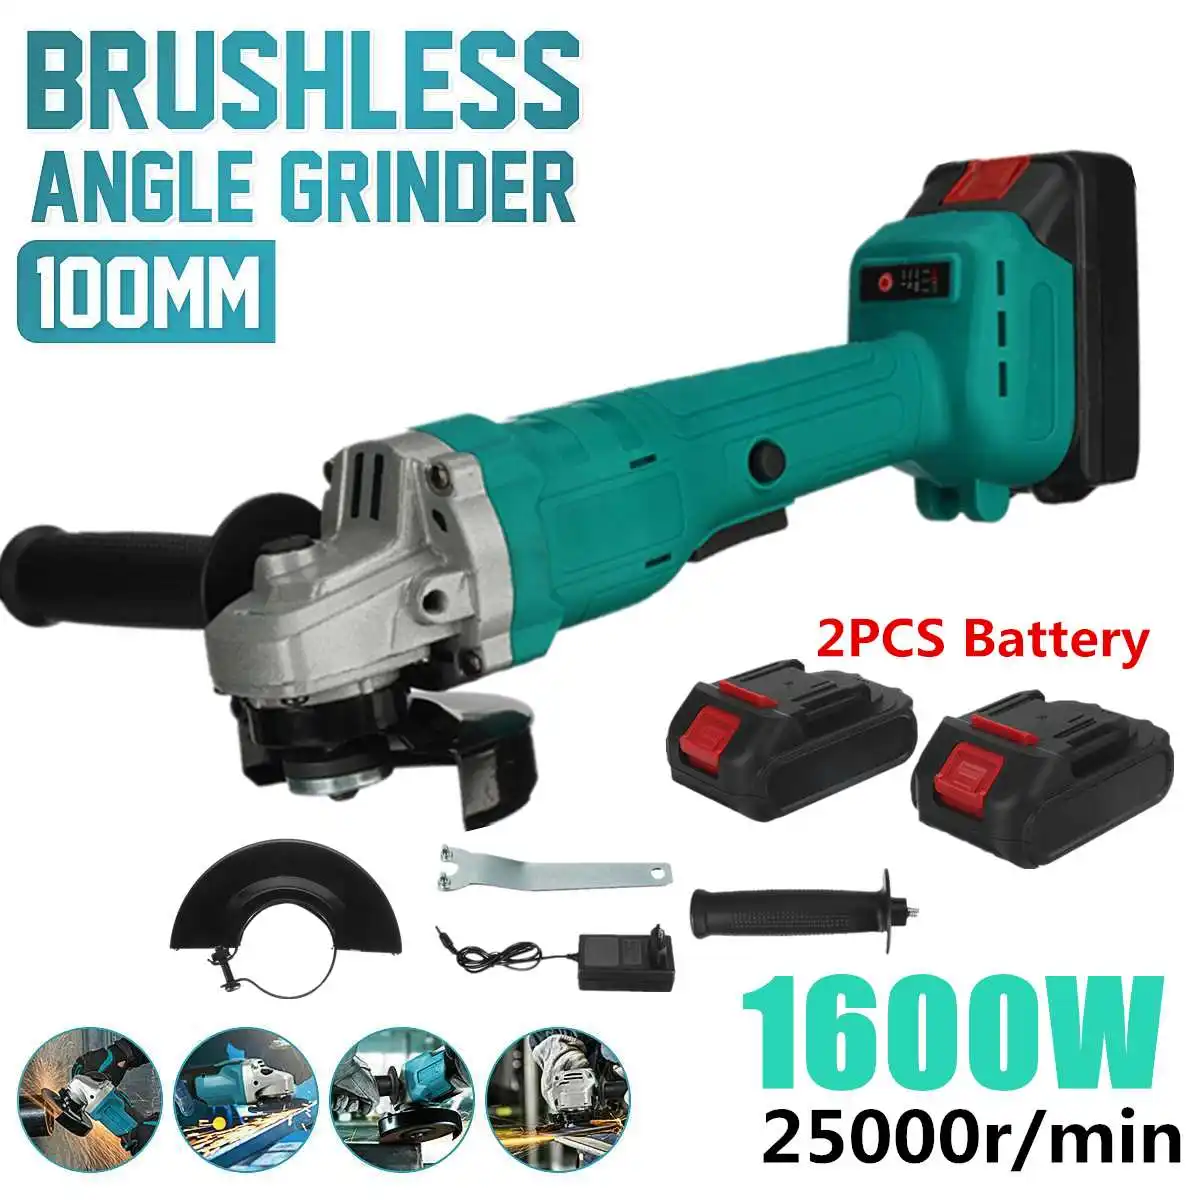 

1600W Rechargeable Angle Grinder 100mm Electric Impact Grinder For Makita 18V Battery Power Tools Polisher Cutting Machine